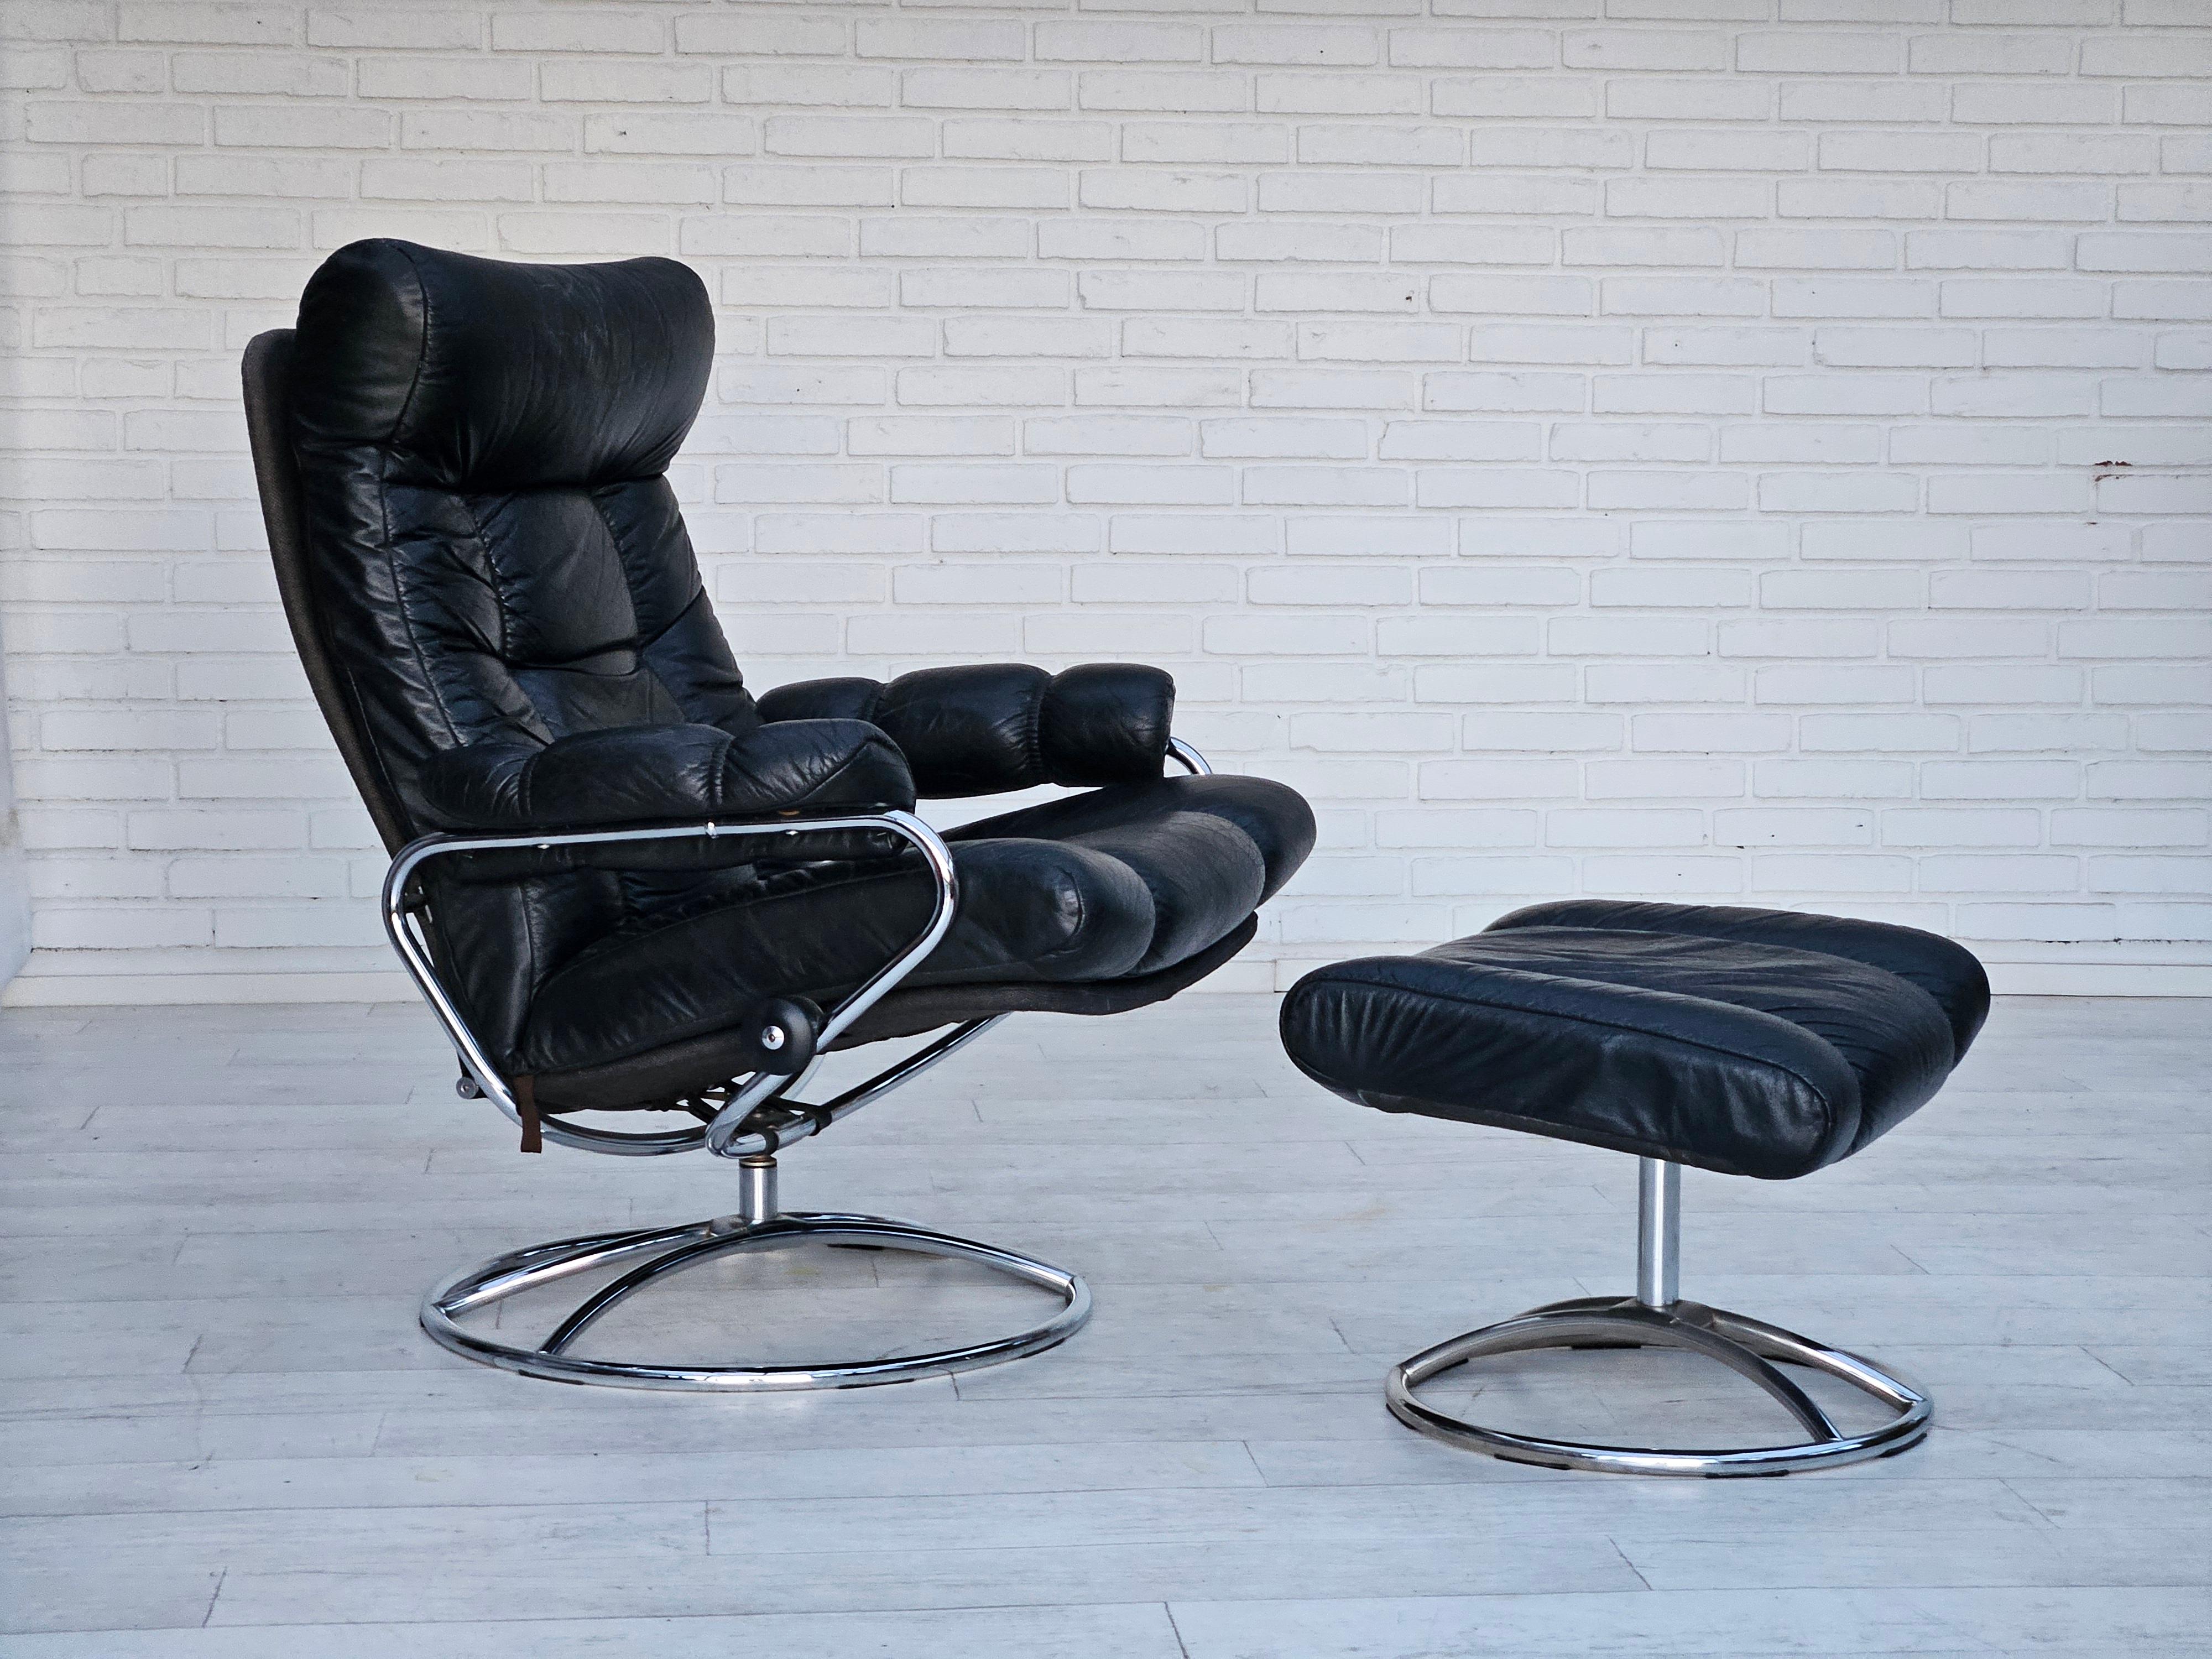 1970s, Norwegian swivel char by Jens Ekornes with footstool in original very good condition: no smells and no stains. Chrome steel base, black leather, canvas. Adjustable seat with backrest. Manufactured by Norwegian furniture manufacturer